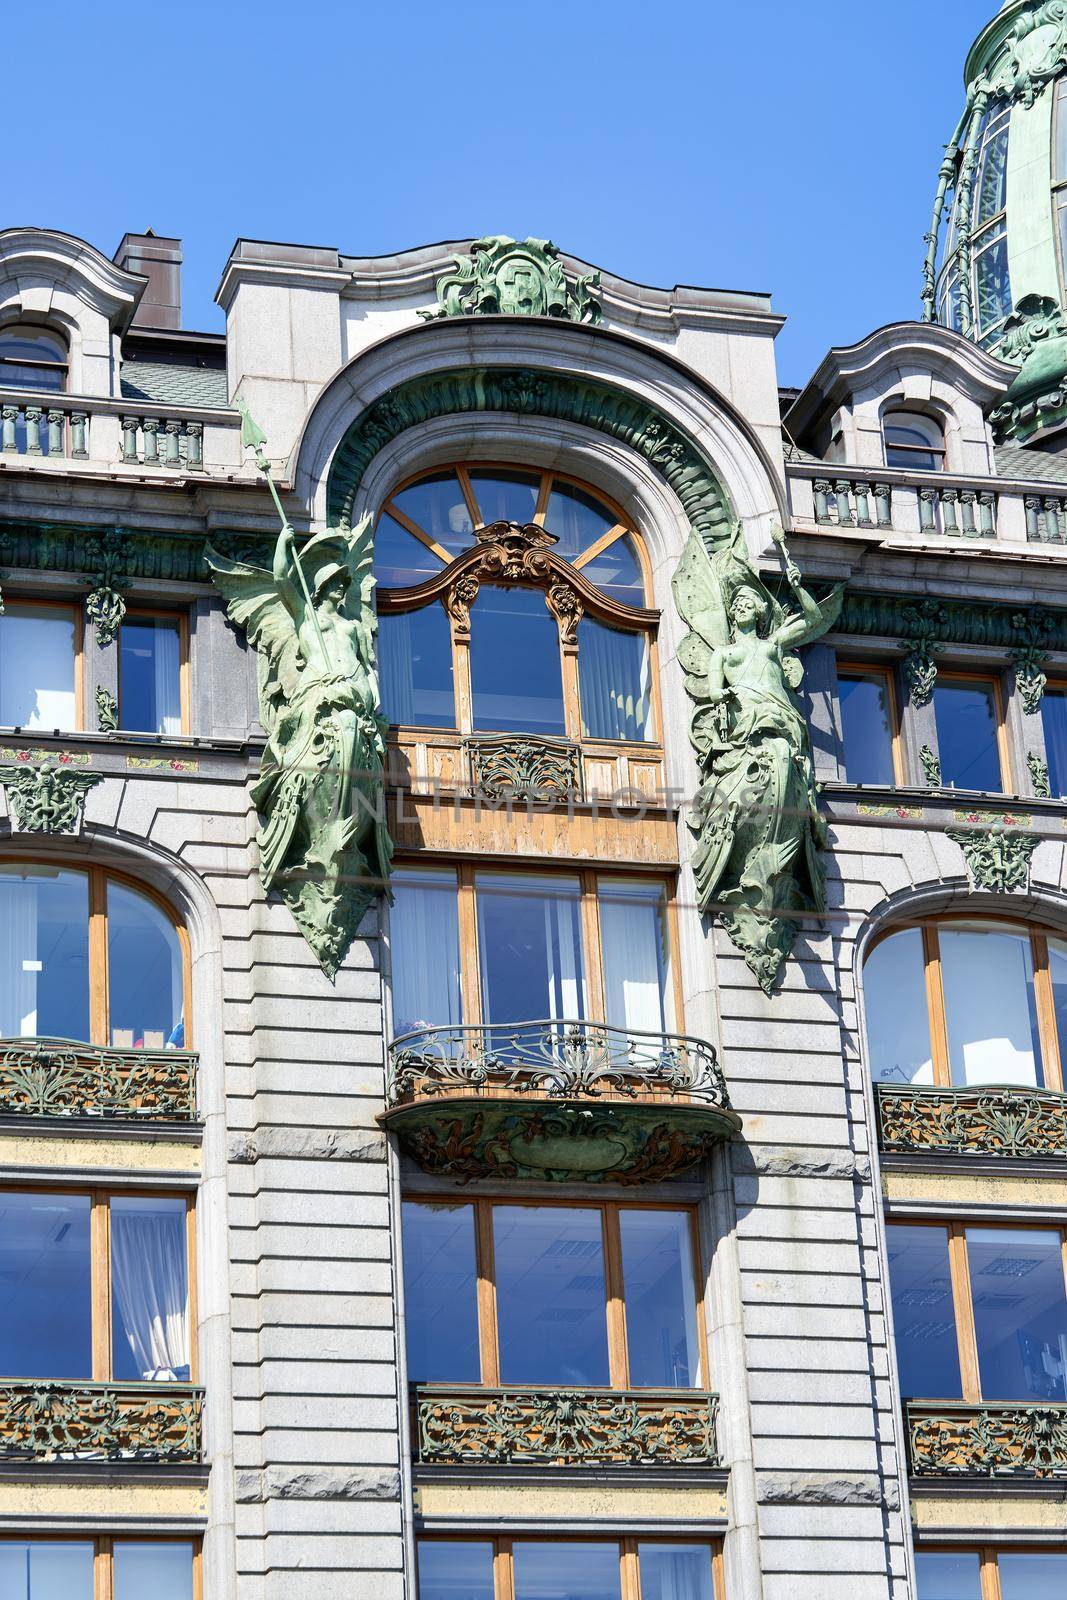 View of architectural details of the famous Singer House Building in St. Petersburg. House of Books city landmark